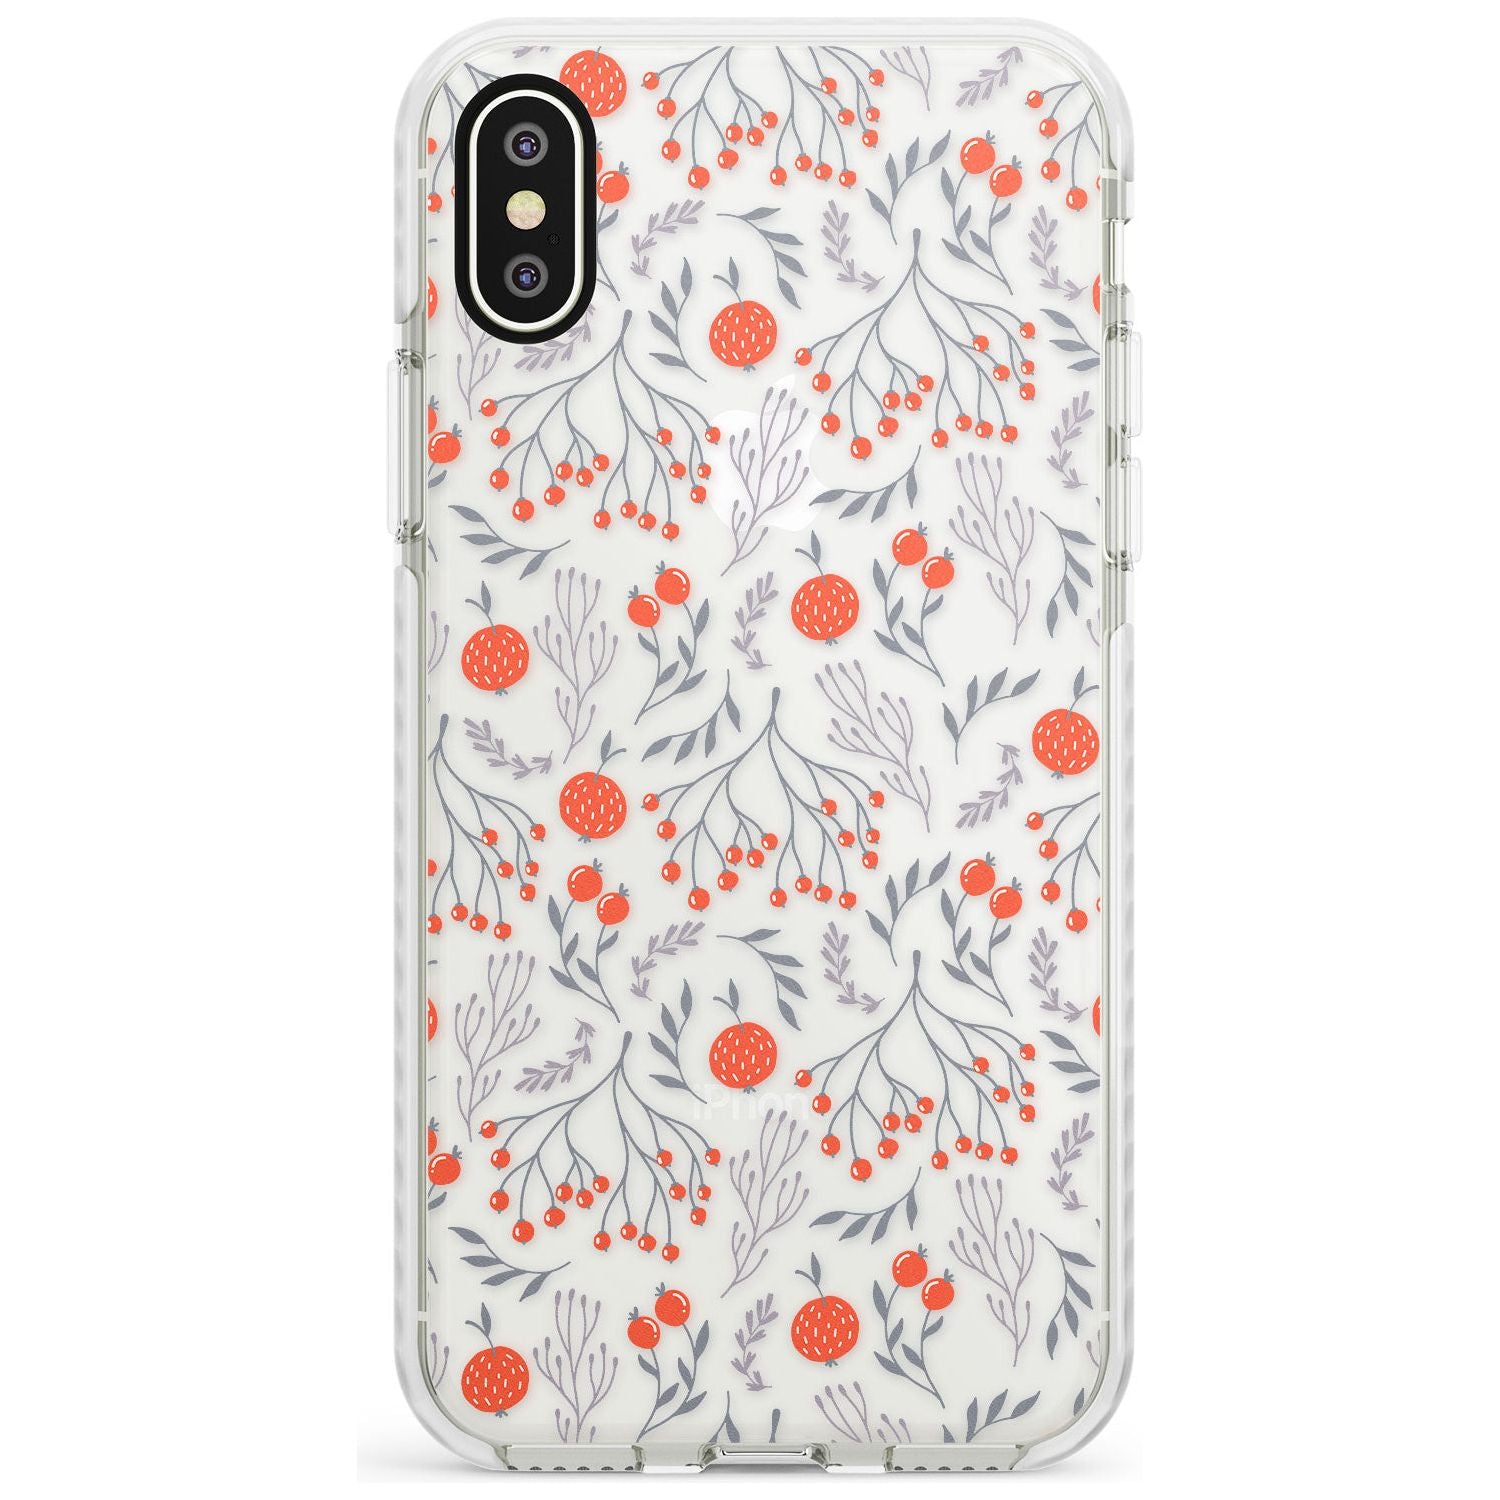 Red Fruits Transparent Floral Impact Phone Case for iPhone X XS Max XR